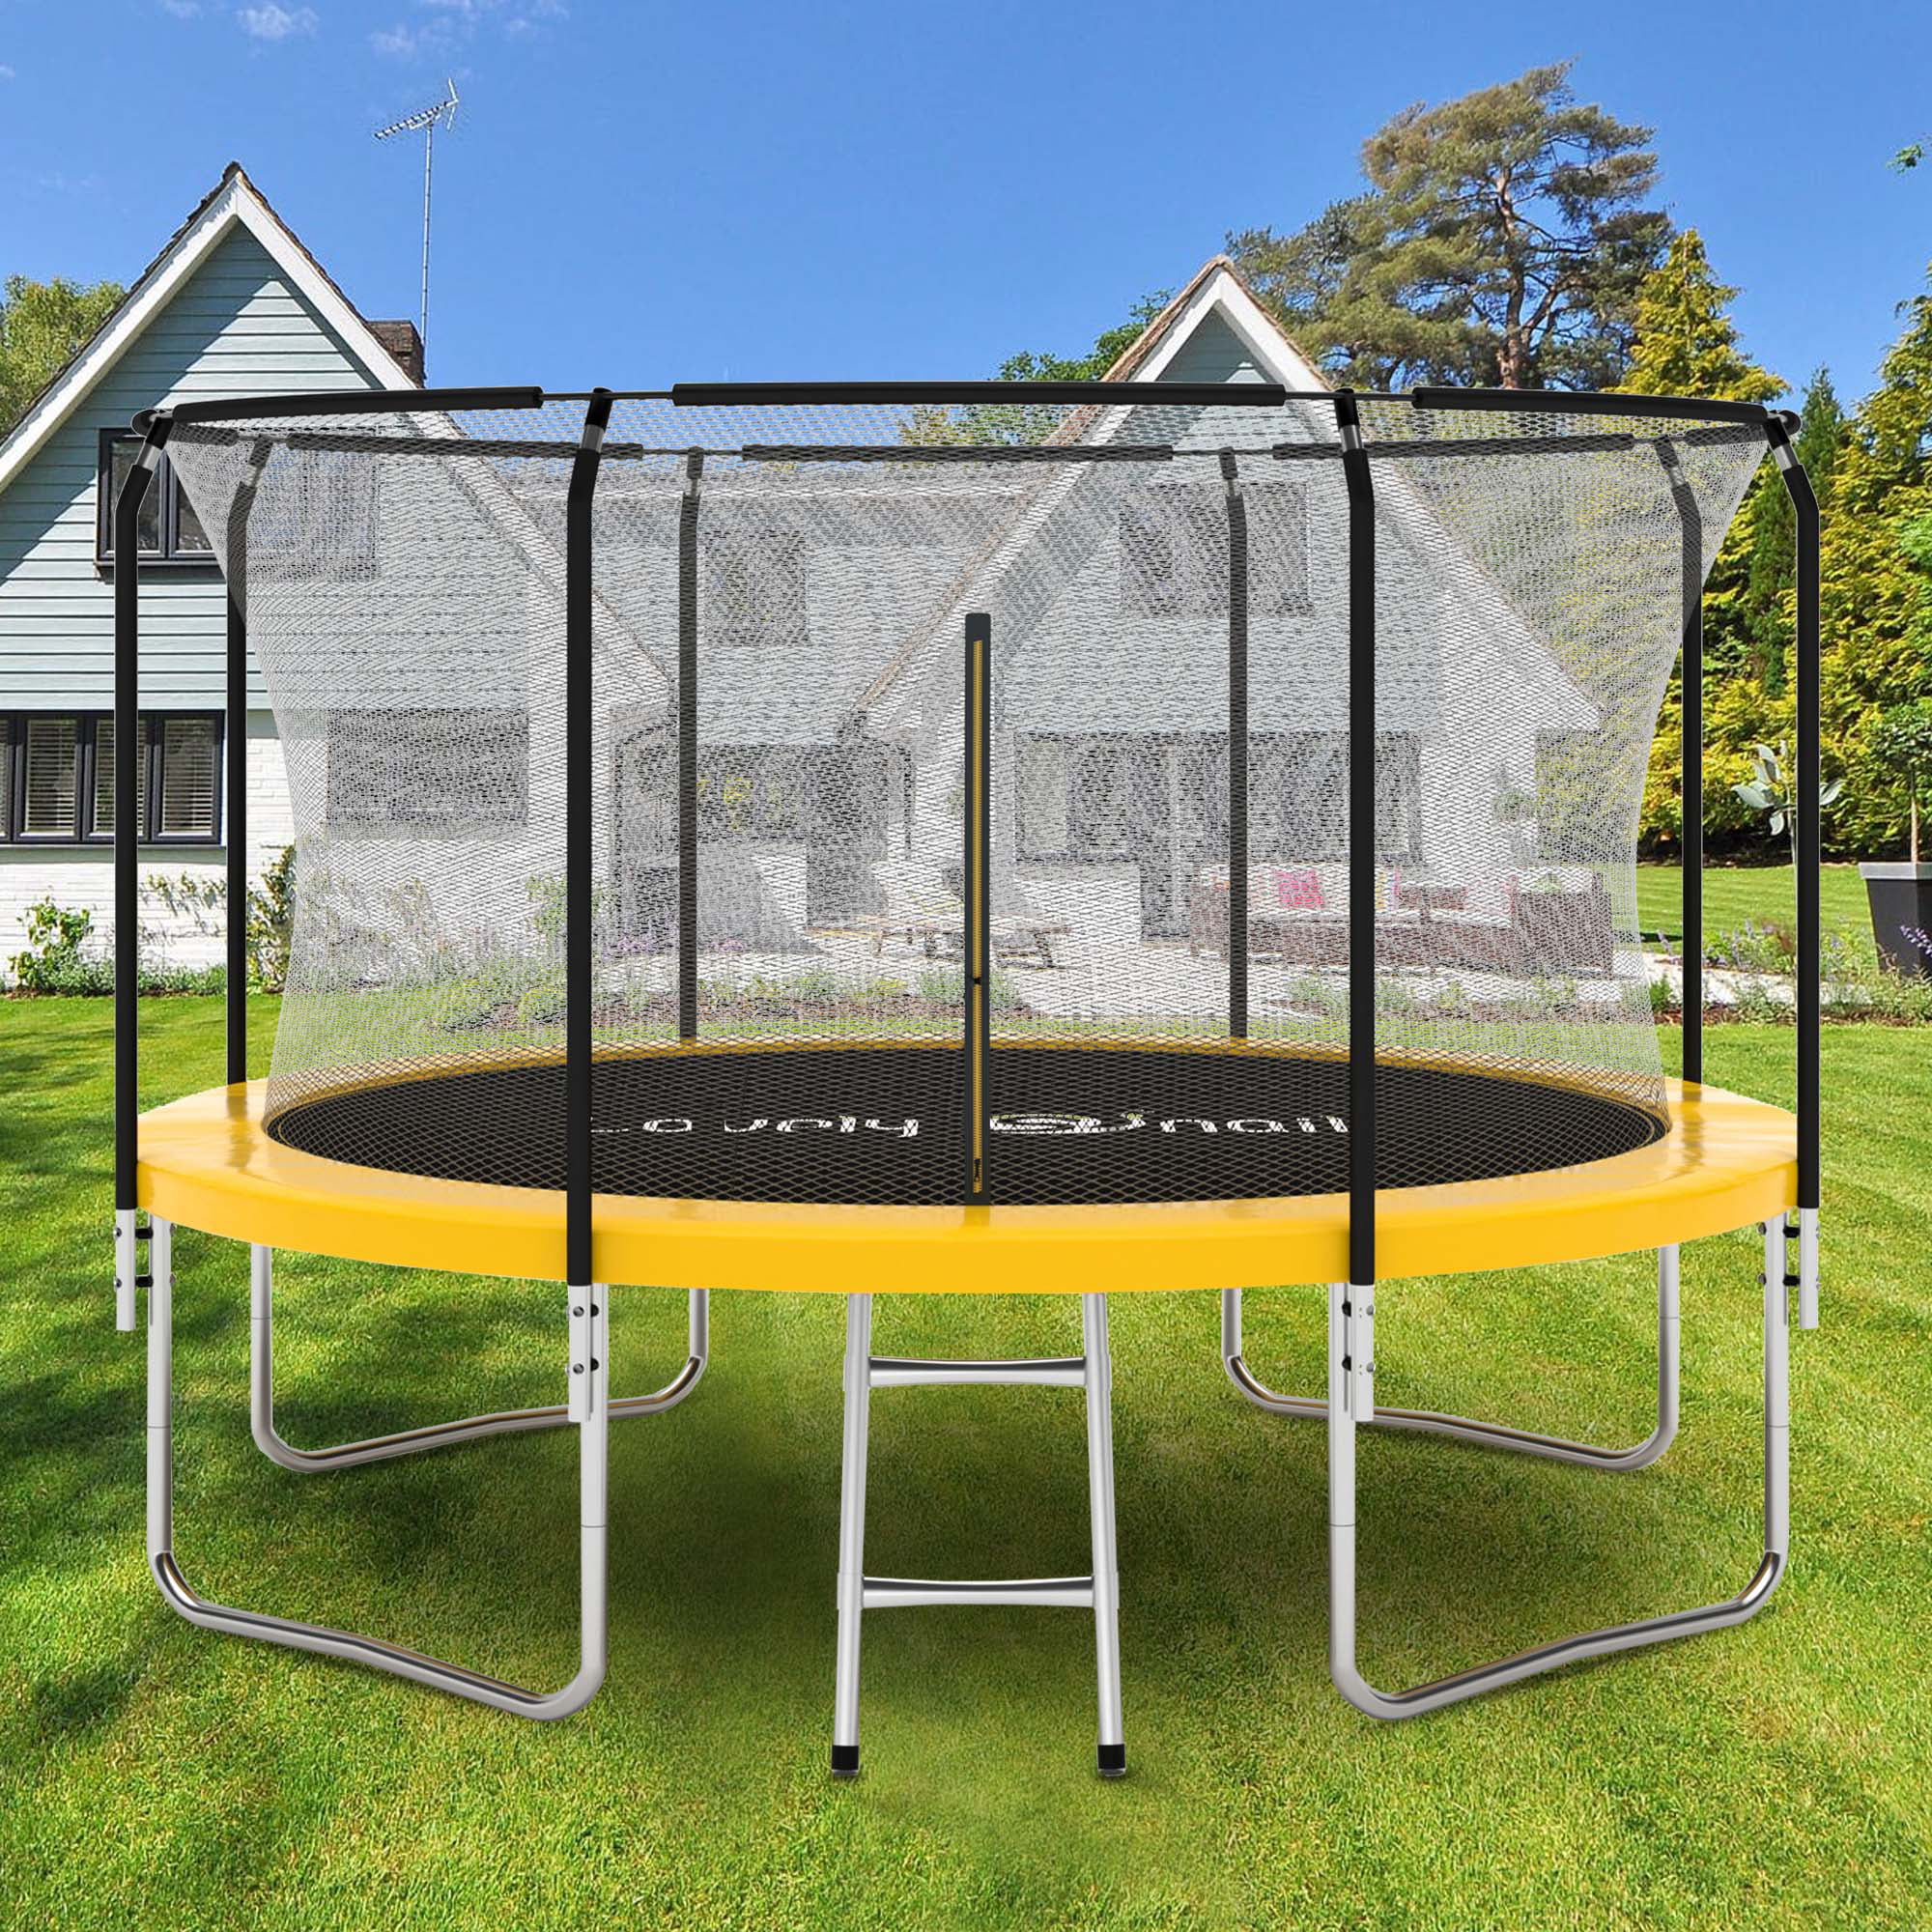 12FT Round Trampoline Combo Safety Enclosure Bounce Jump Net w/Spring Pad&Ladder 